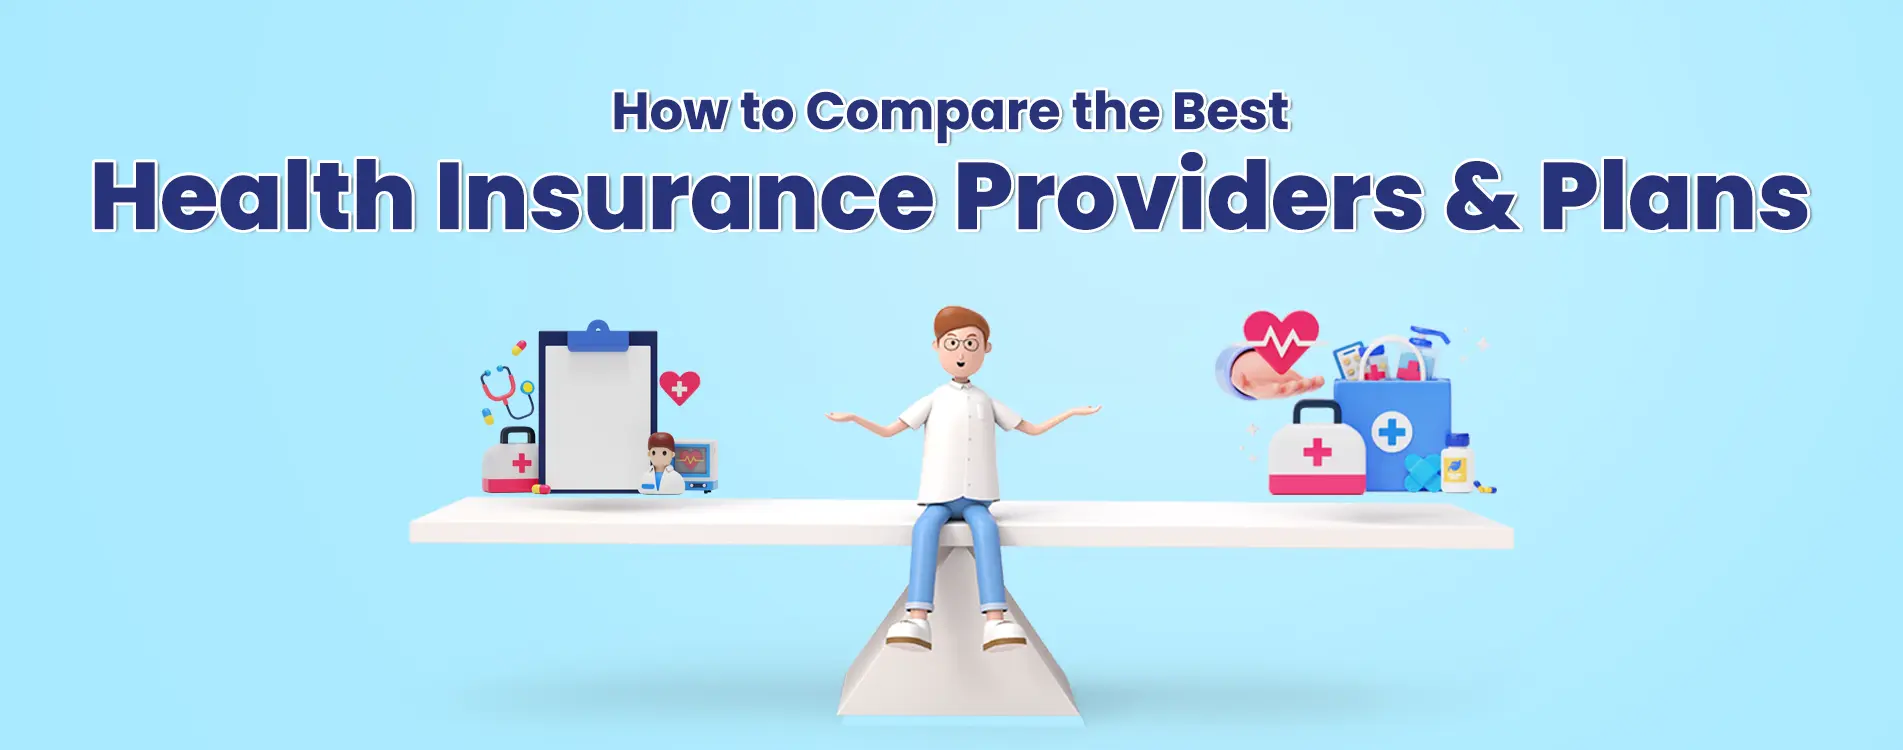 How to Compare the Best Health Insurance Providers and Plans